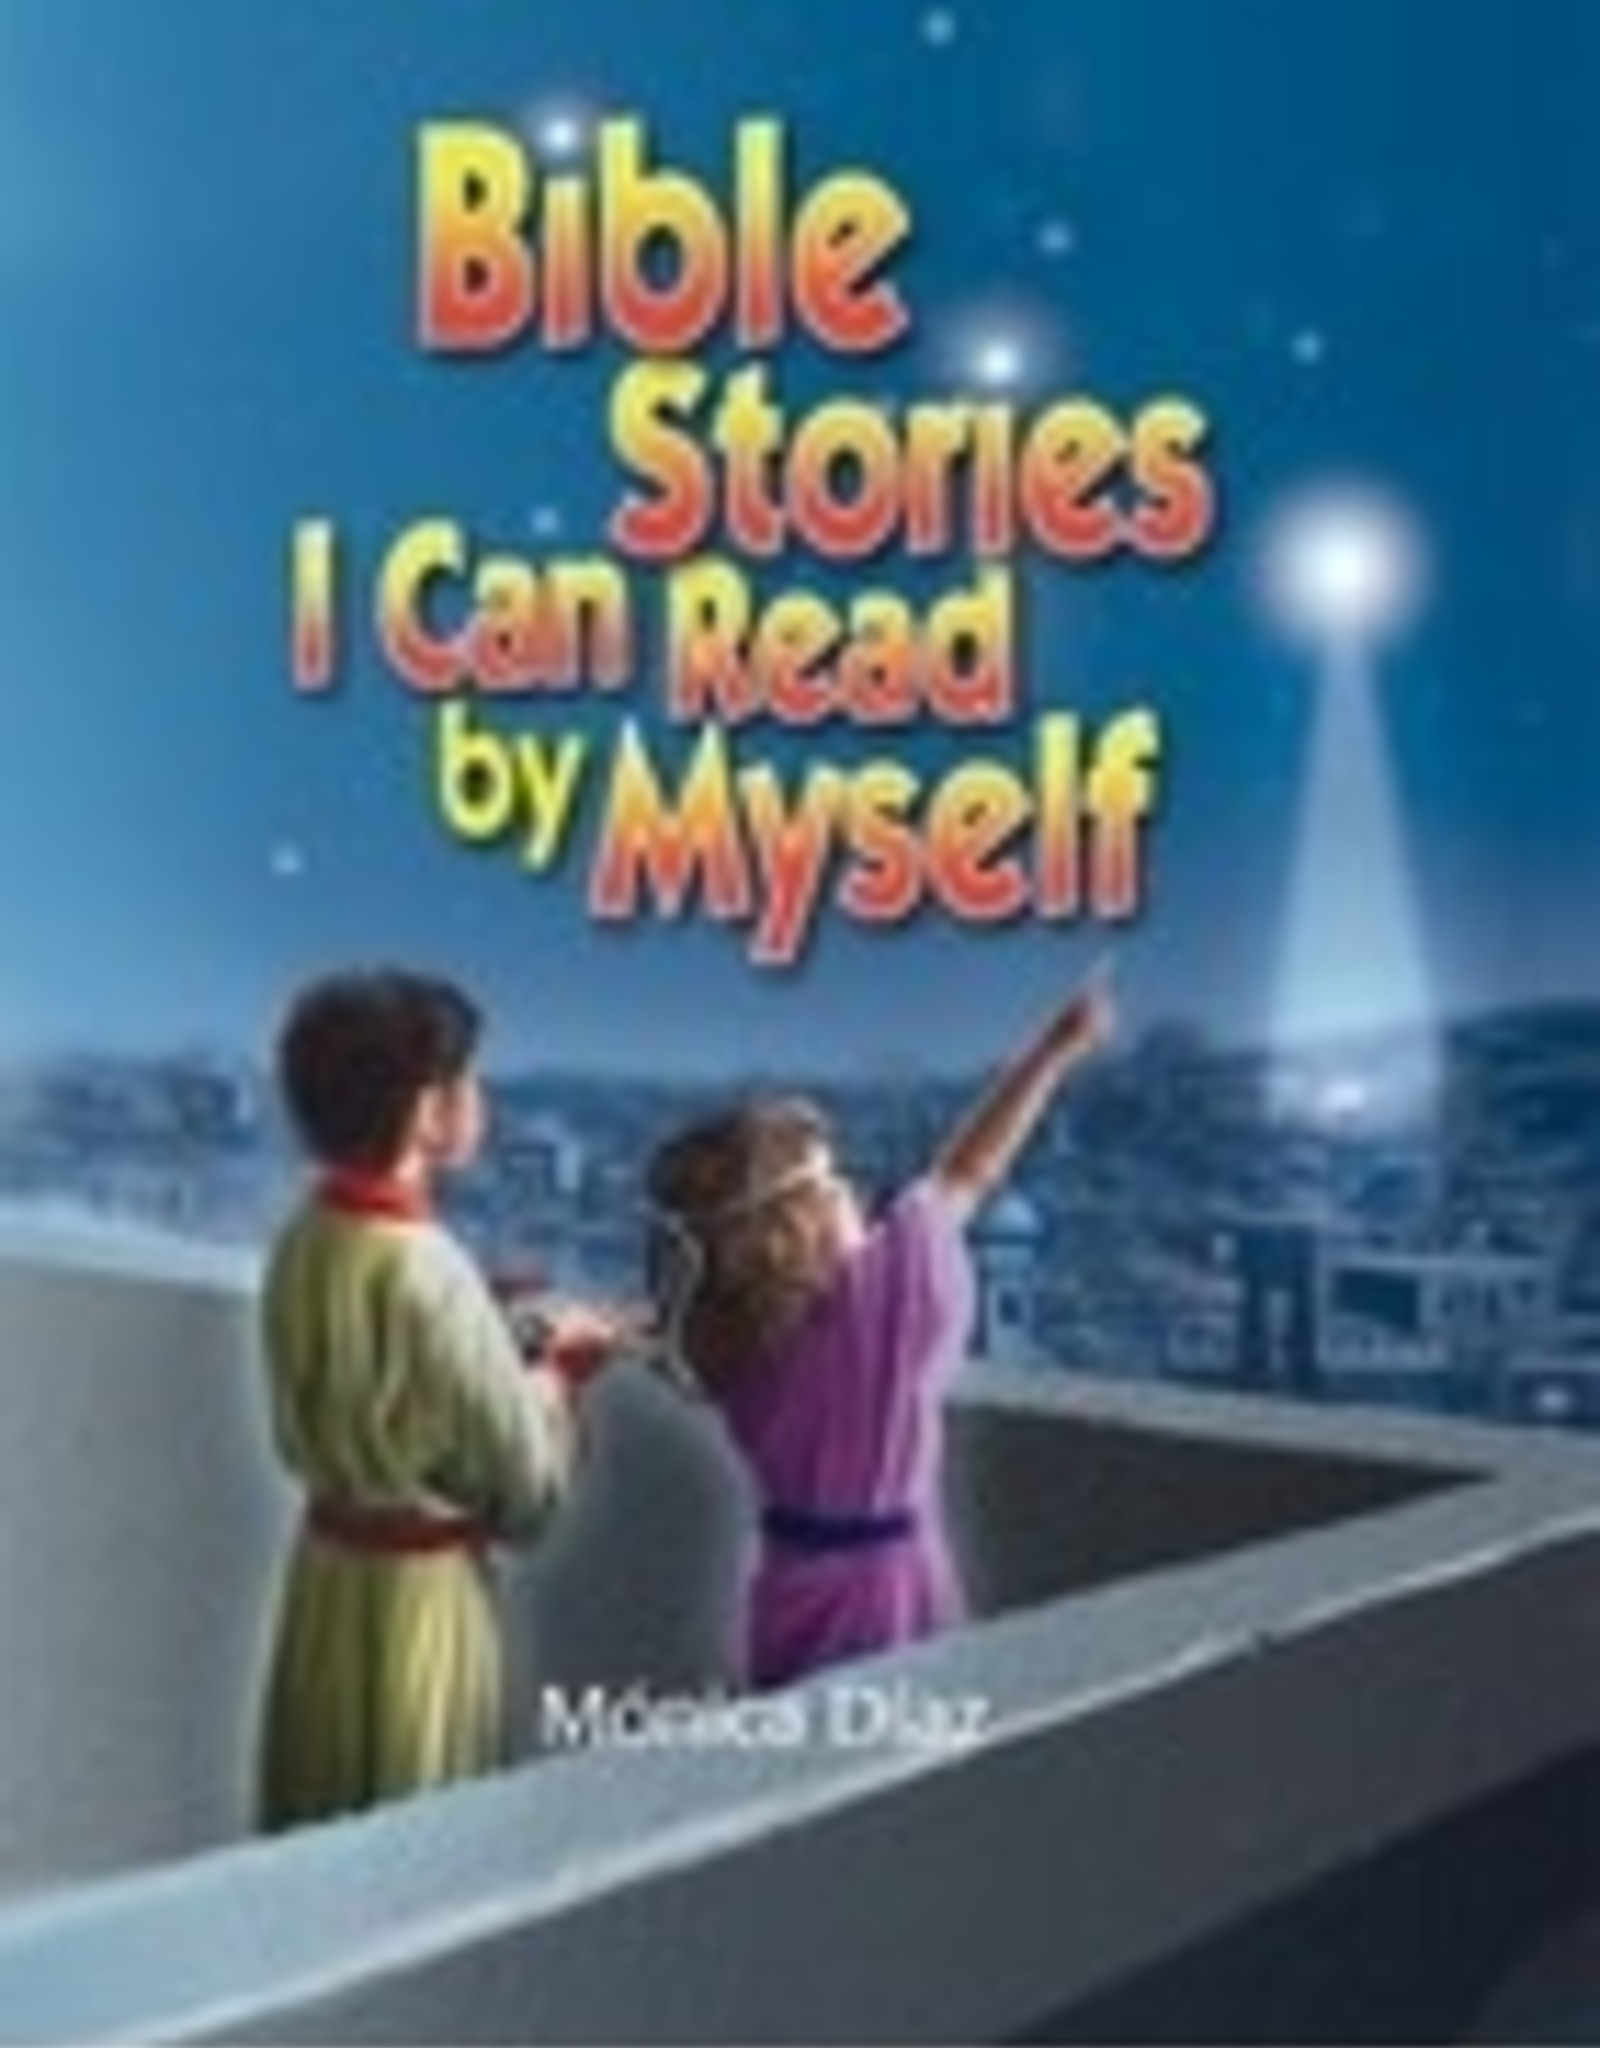 Bible Stories I can read by Myself